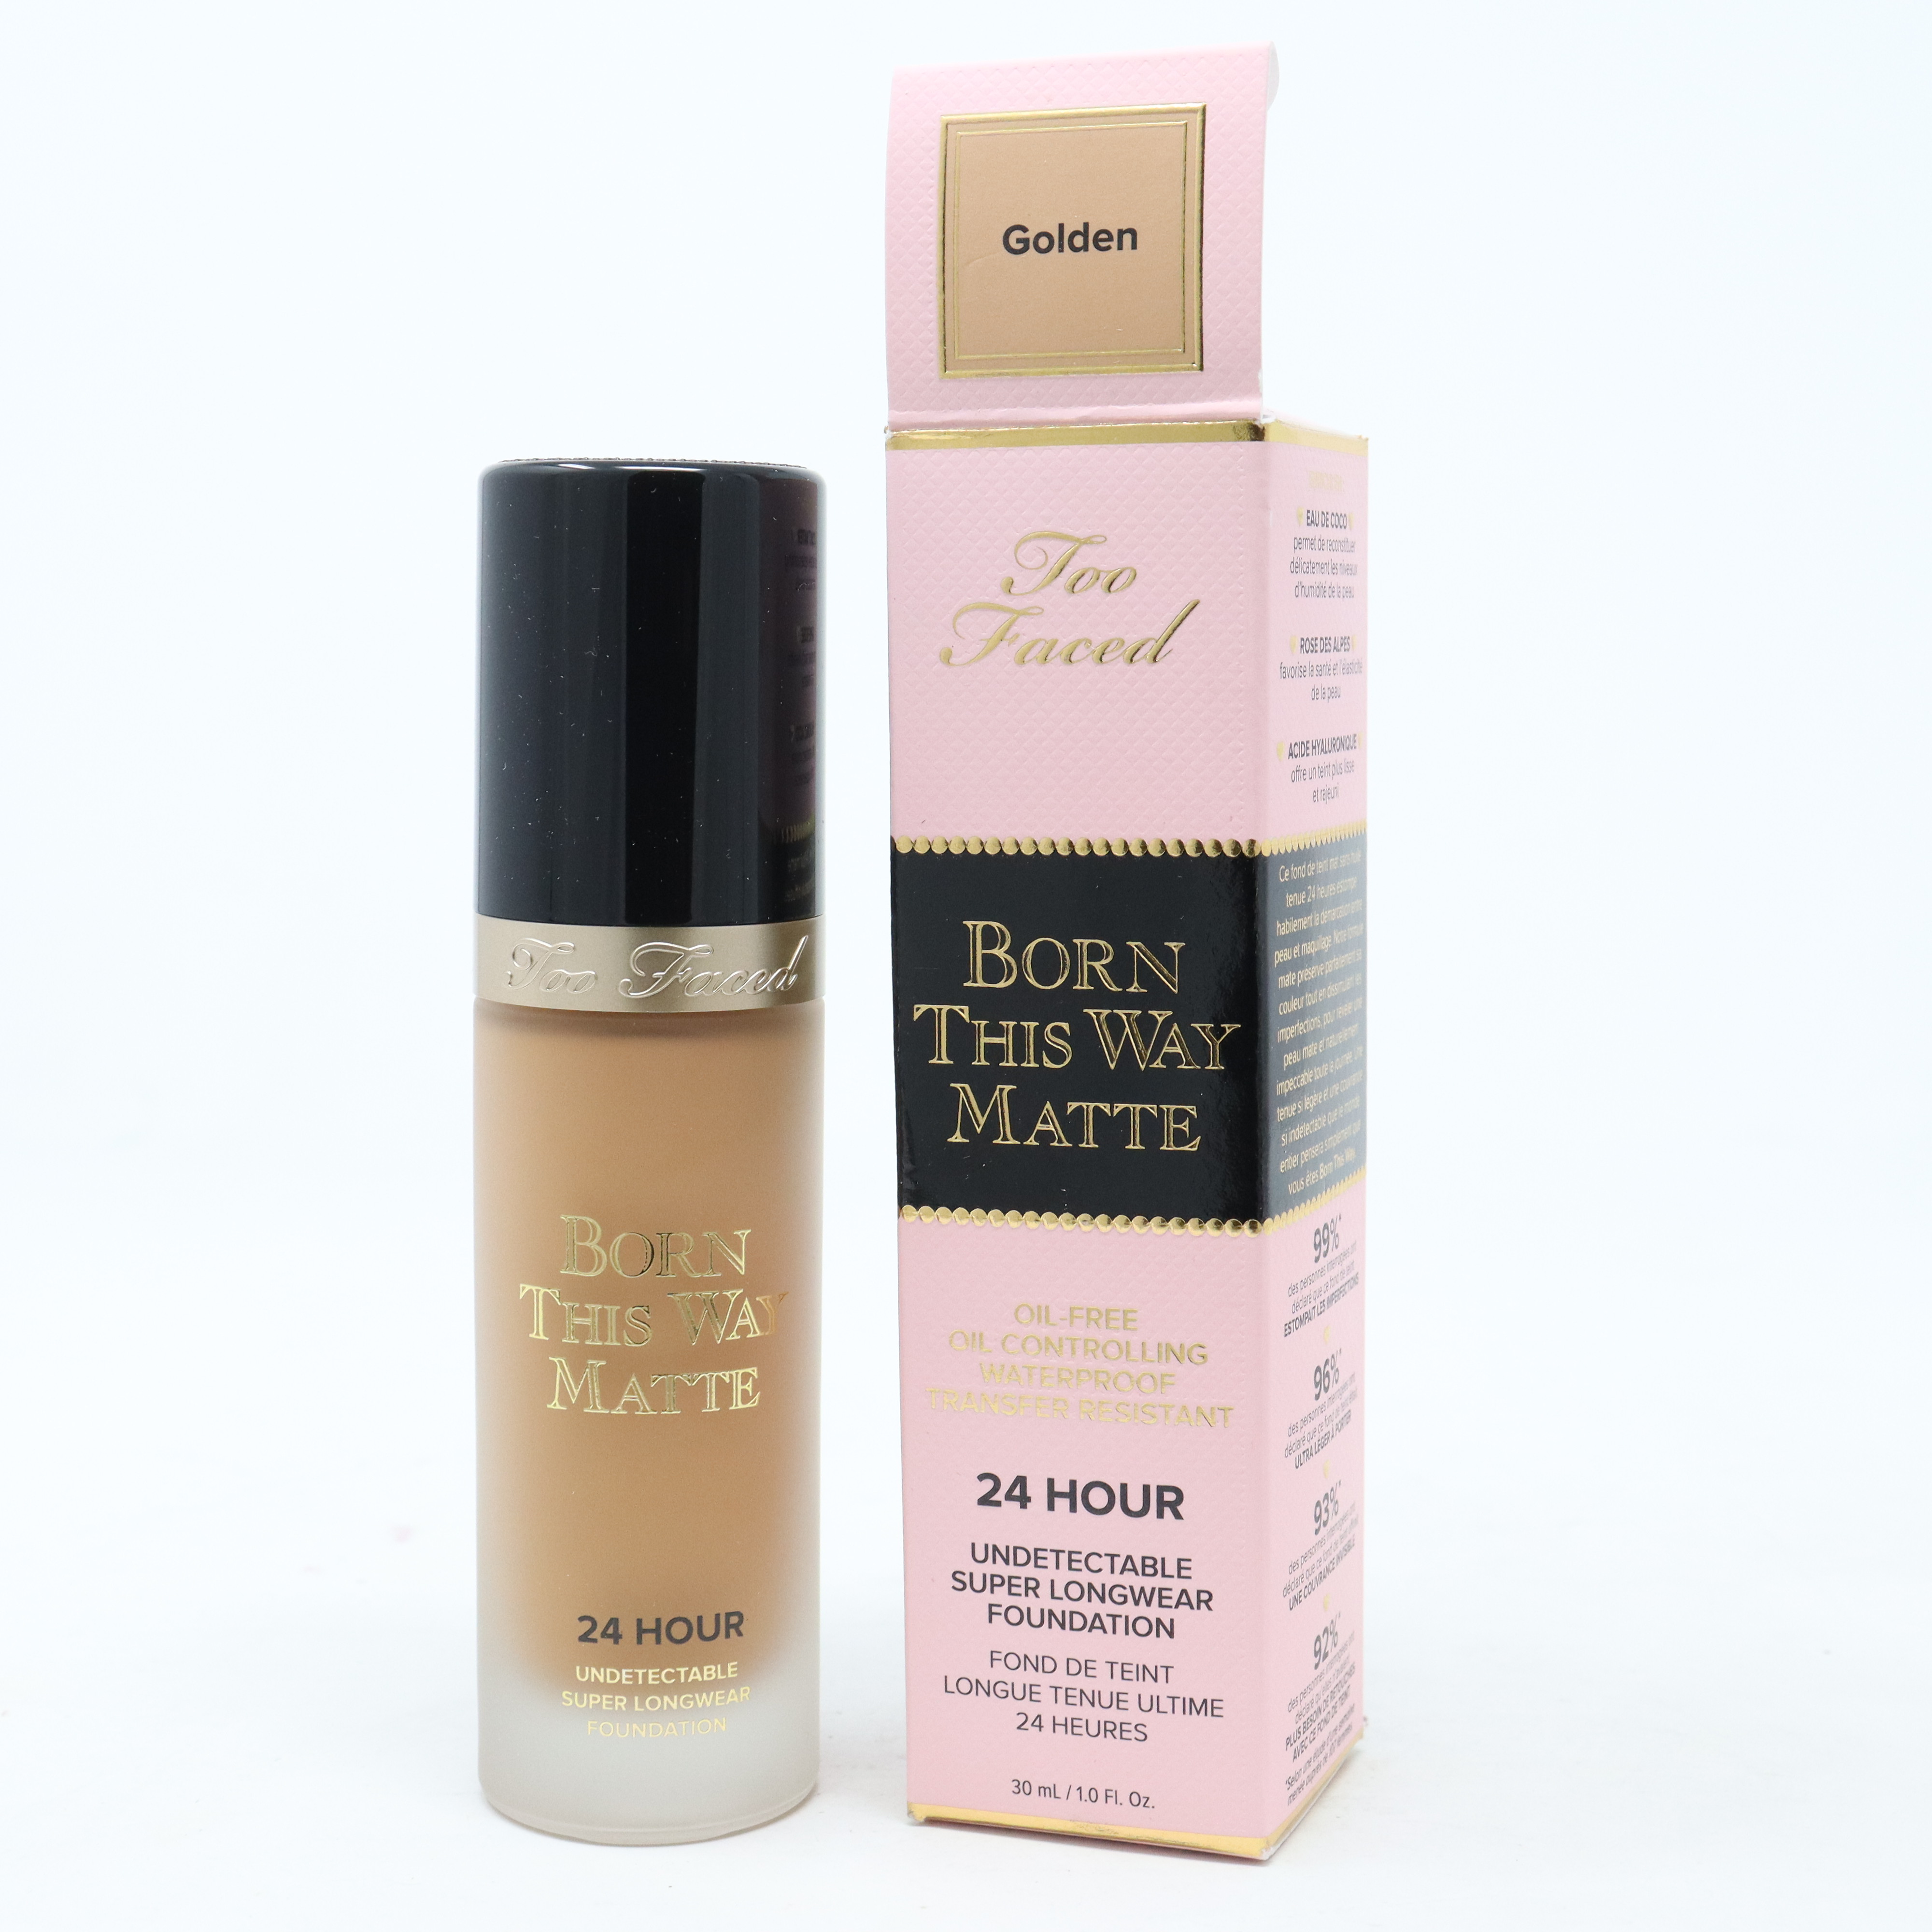 Too eBay Box | This Born 24 With Faced New 1.0oz/30ml Matte Foundation Way Hour